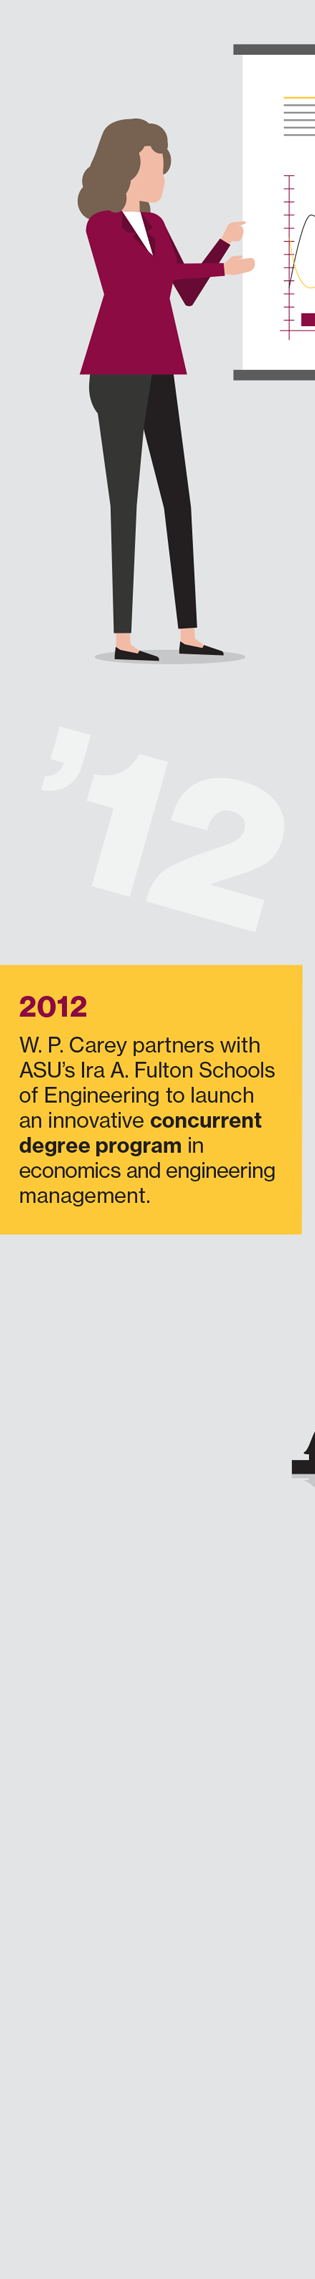 2012 W. P. Carey partners with ASU’s Ira A. Fulton Schools of Engineering to launch an innovative concurrent degree program in economics and engineering management.